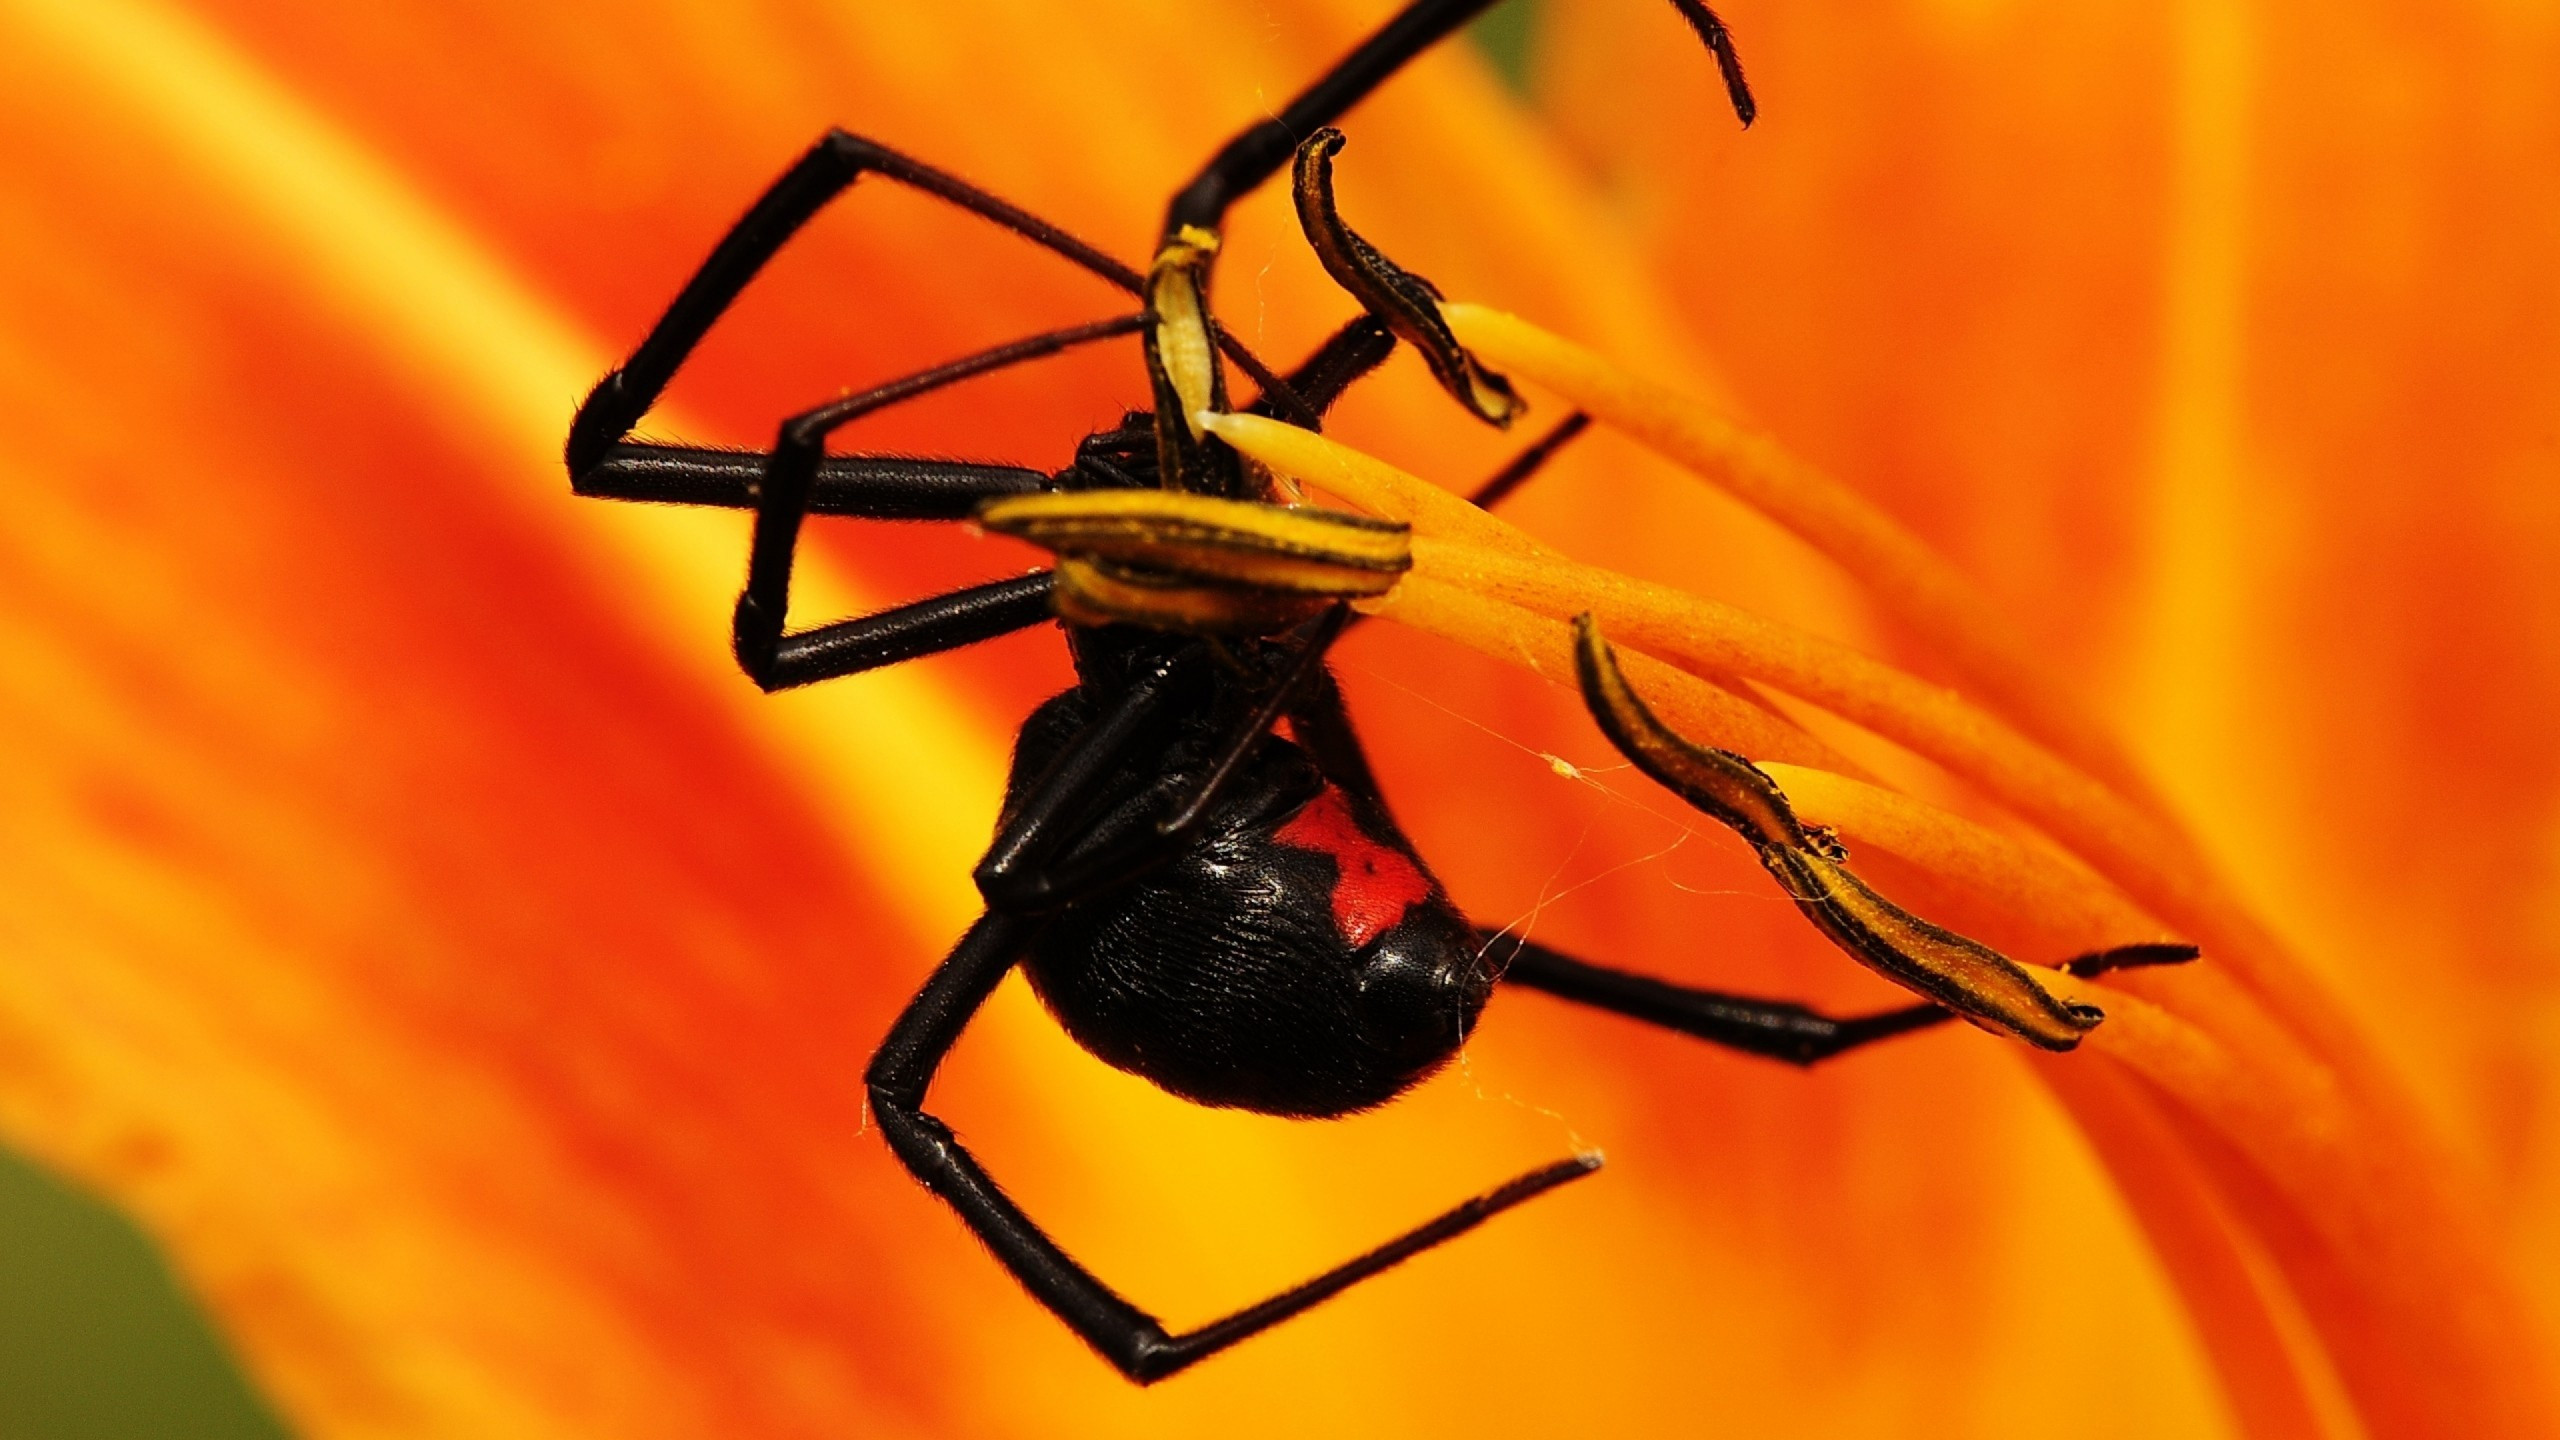 Download 2560x1440 Spider, Insects, Leaves Wallpaper for iMac 27 inch